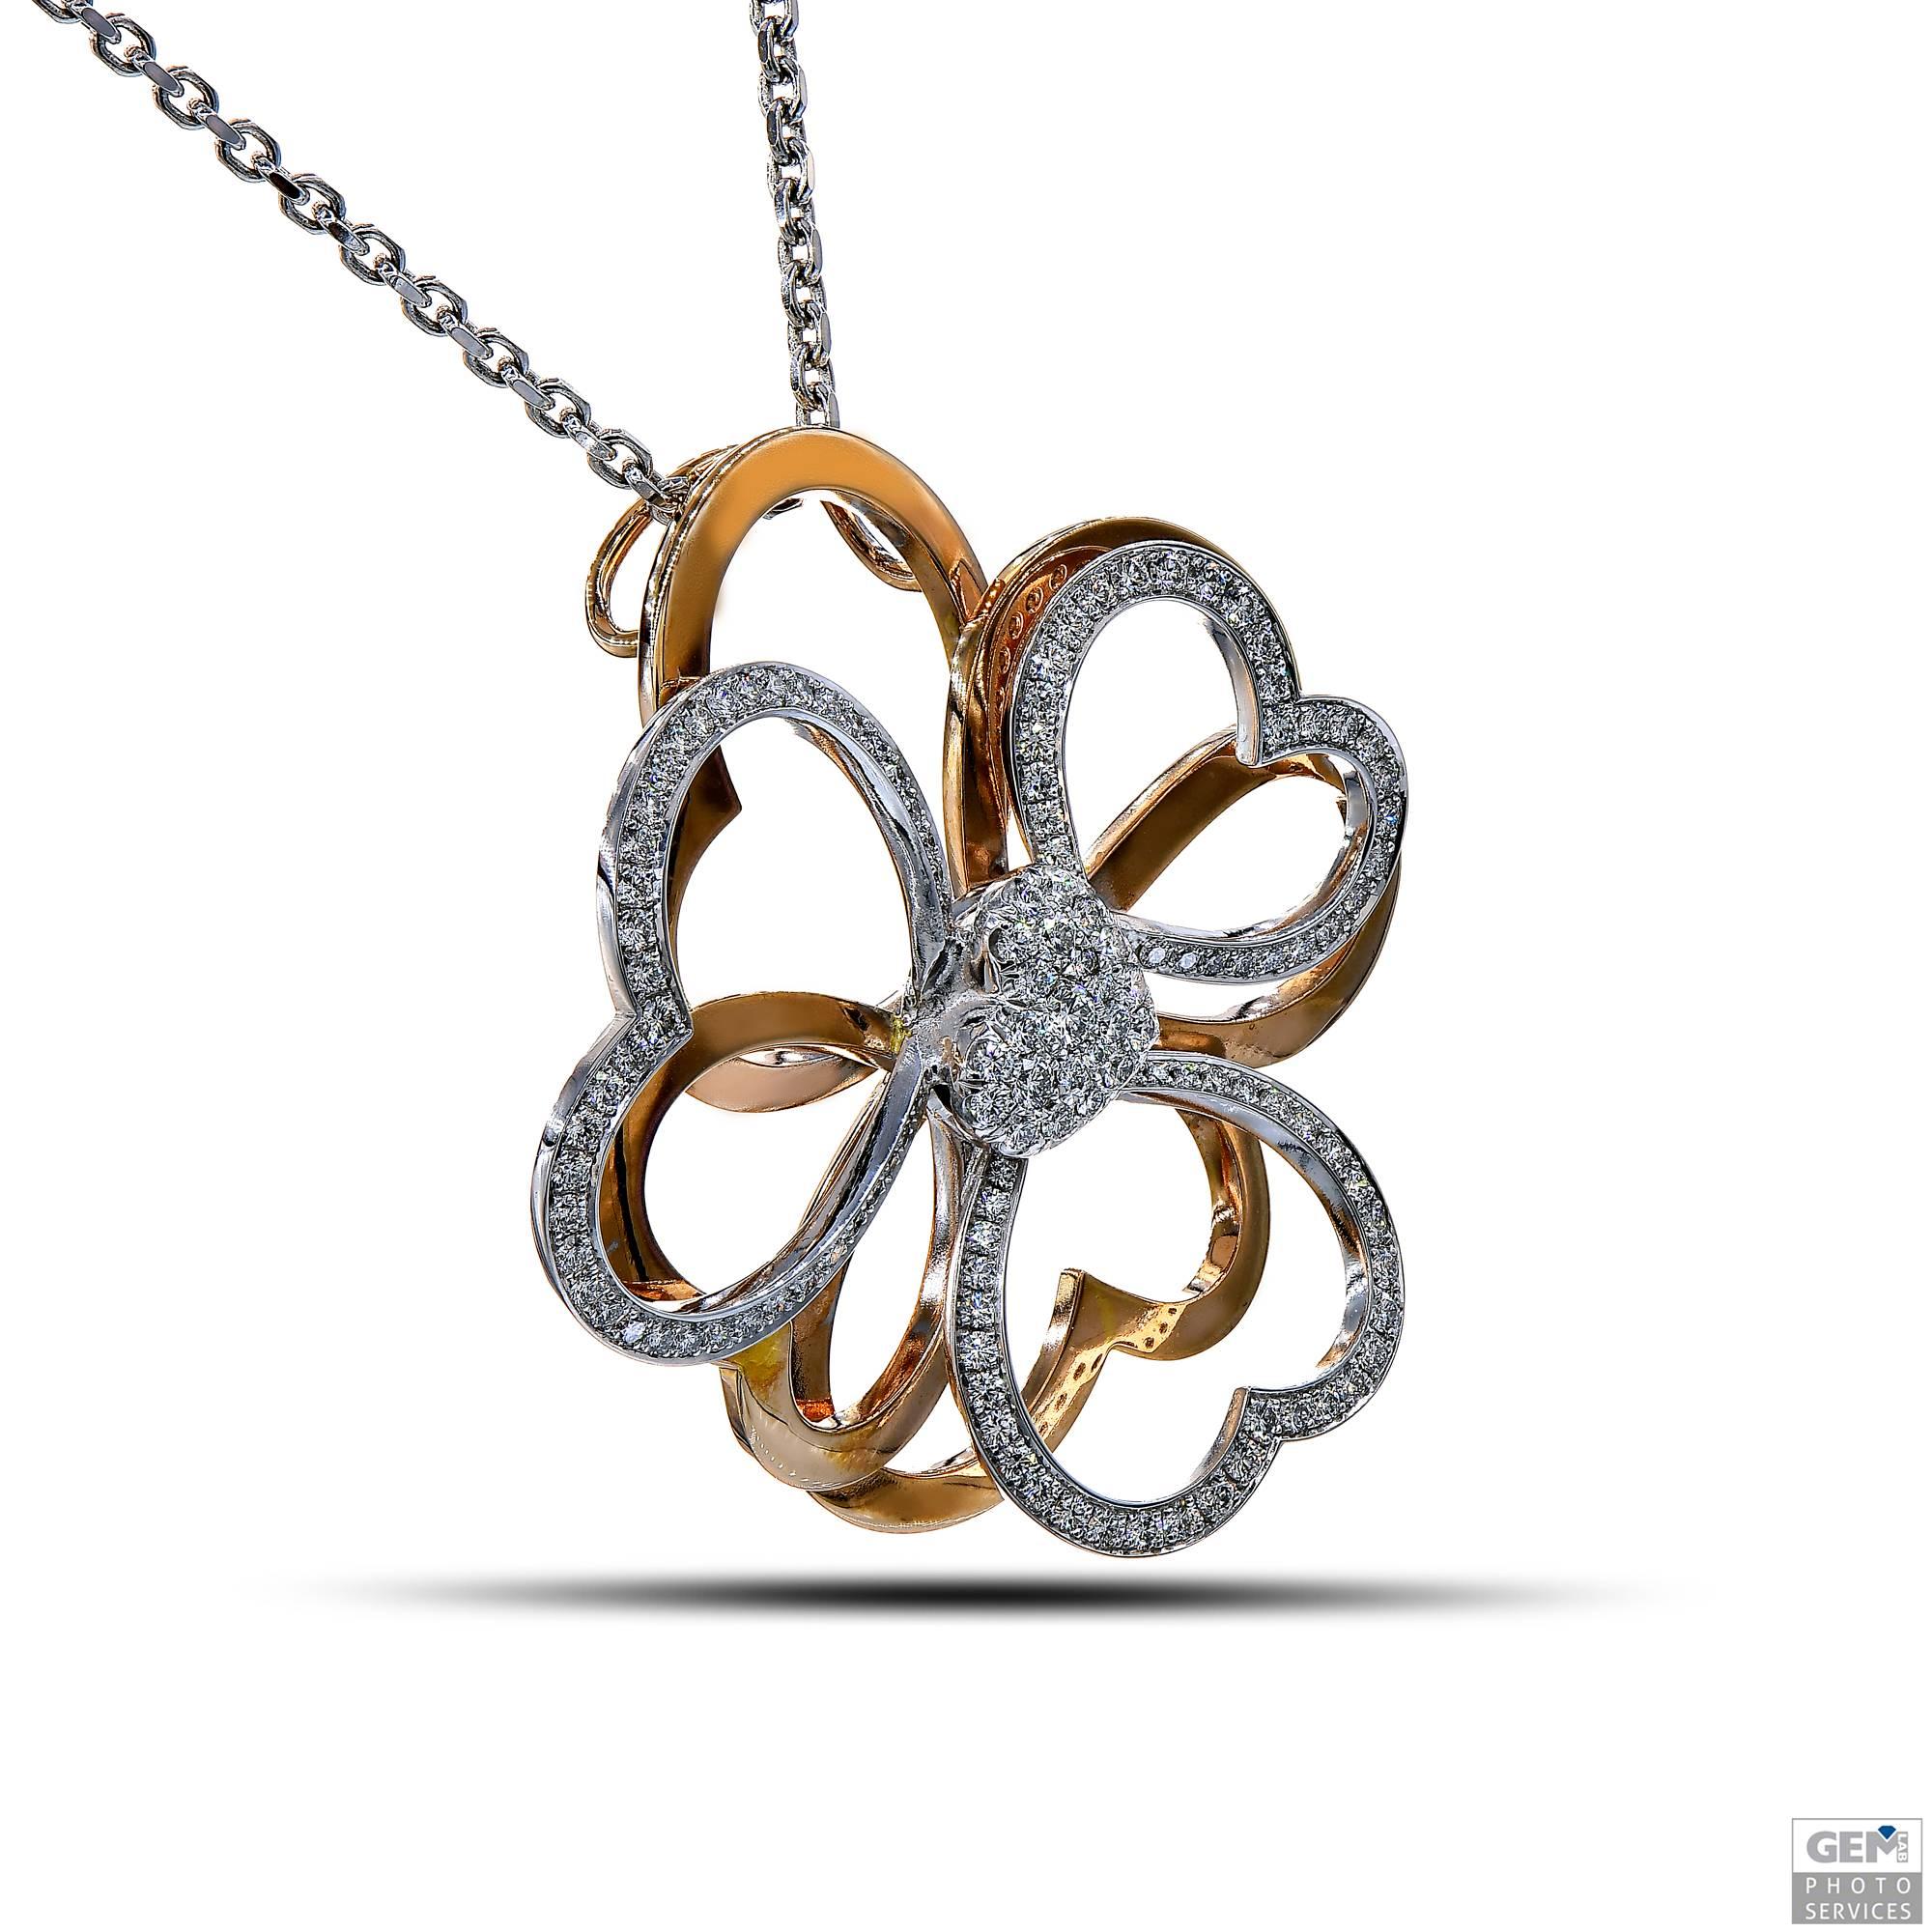 This flower inspired pendant is a special creation by Carigi as a set of hearts. The leaves of the flower are all different heart shapes, connected as a pendant by a center heart shape, entirely set with small round diamonds for a total of 2,01